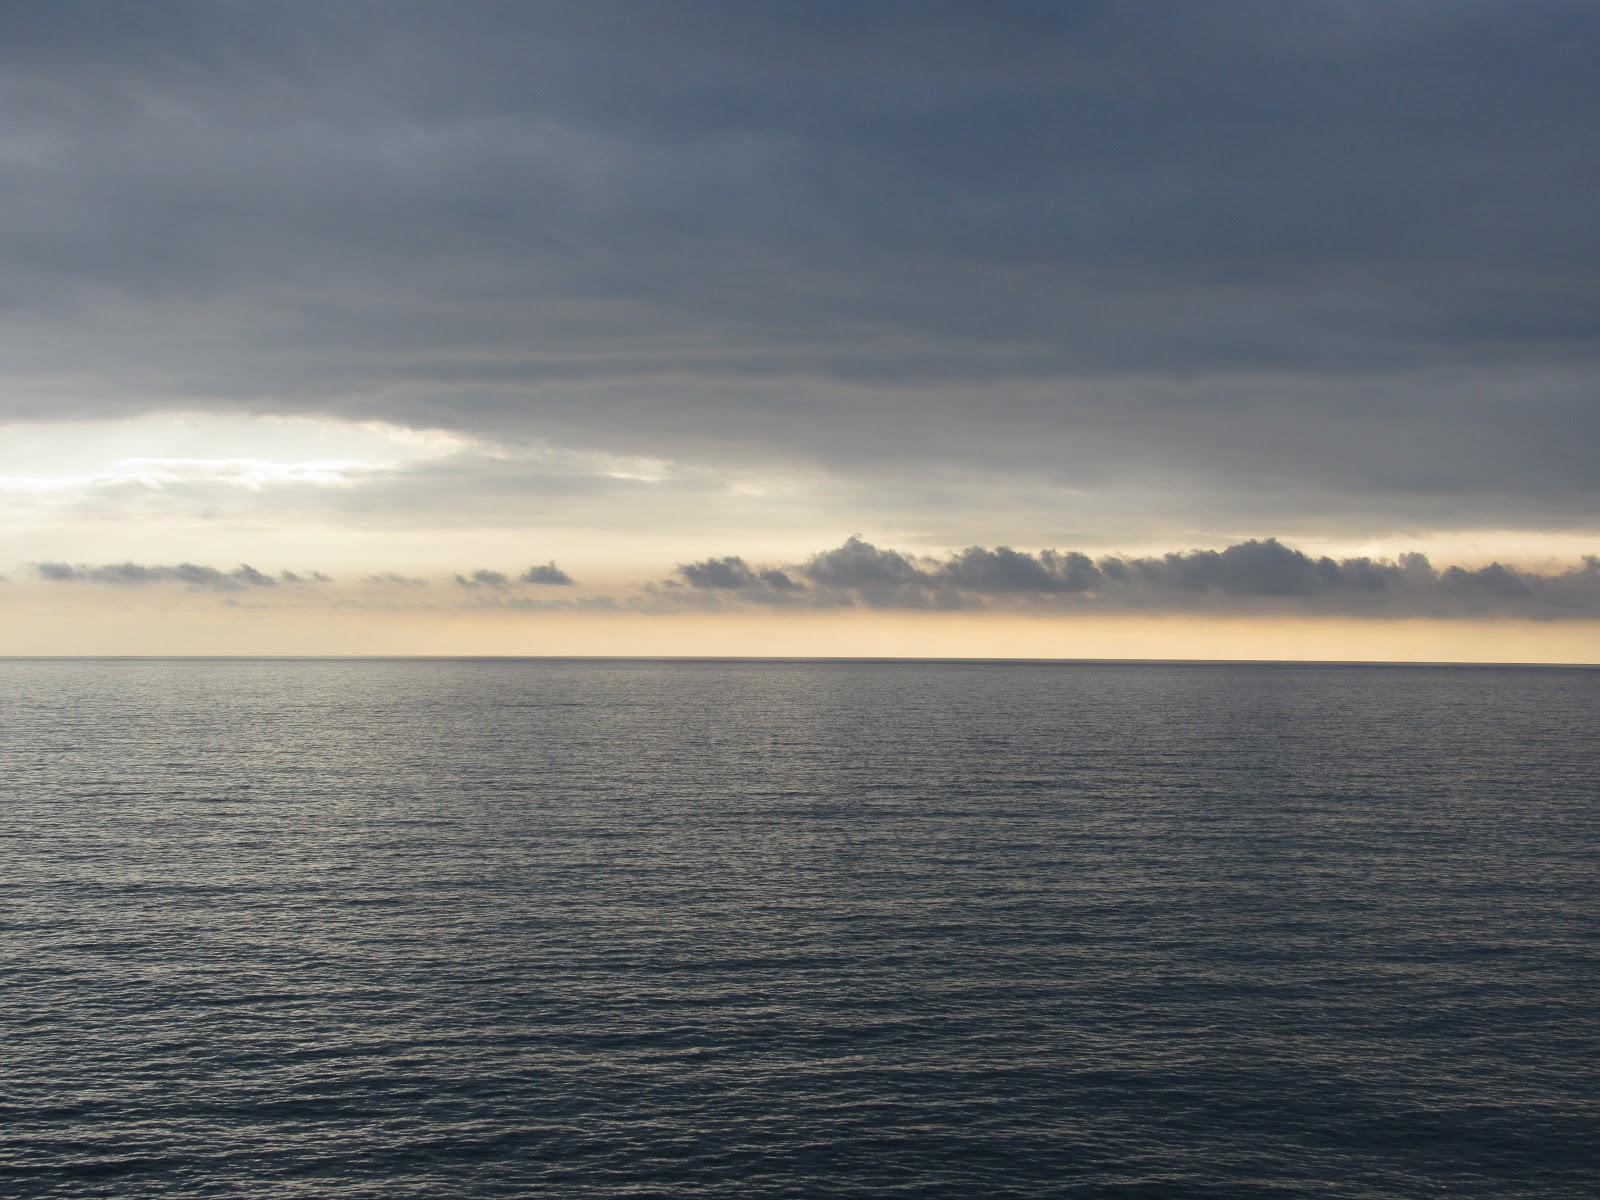 A photo of a large body of water meeting a cloudy sky at the horizon.